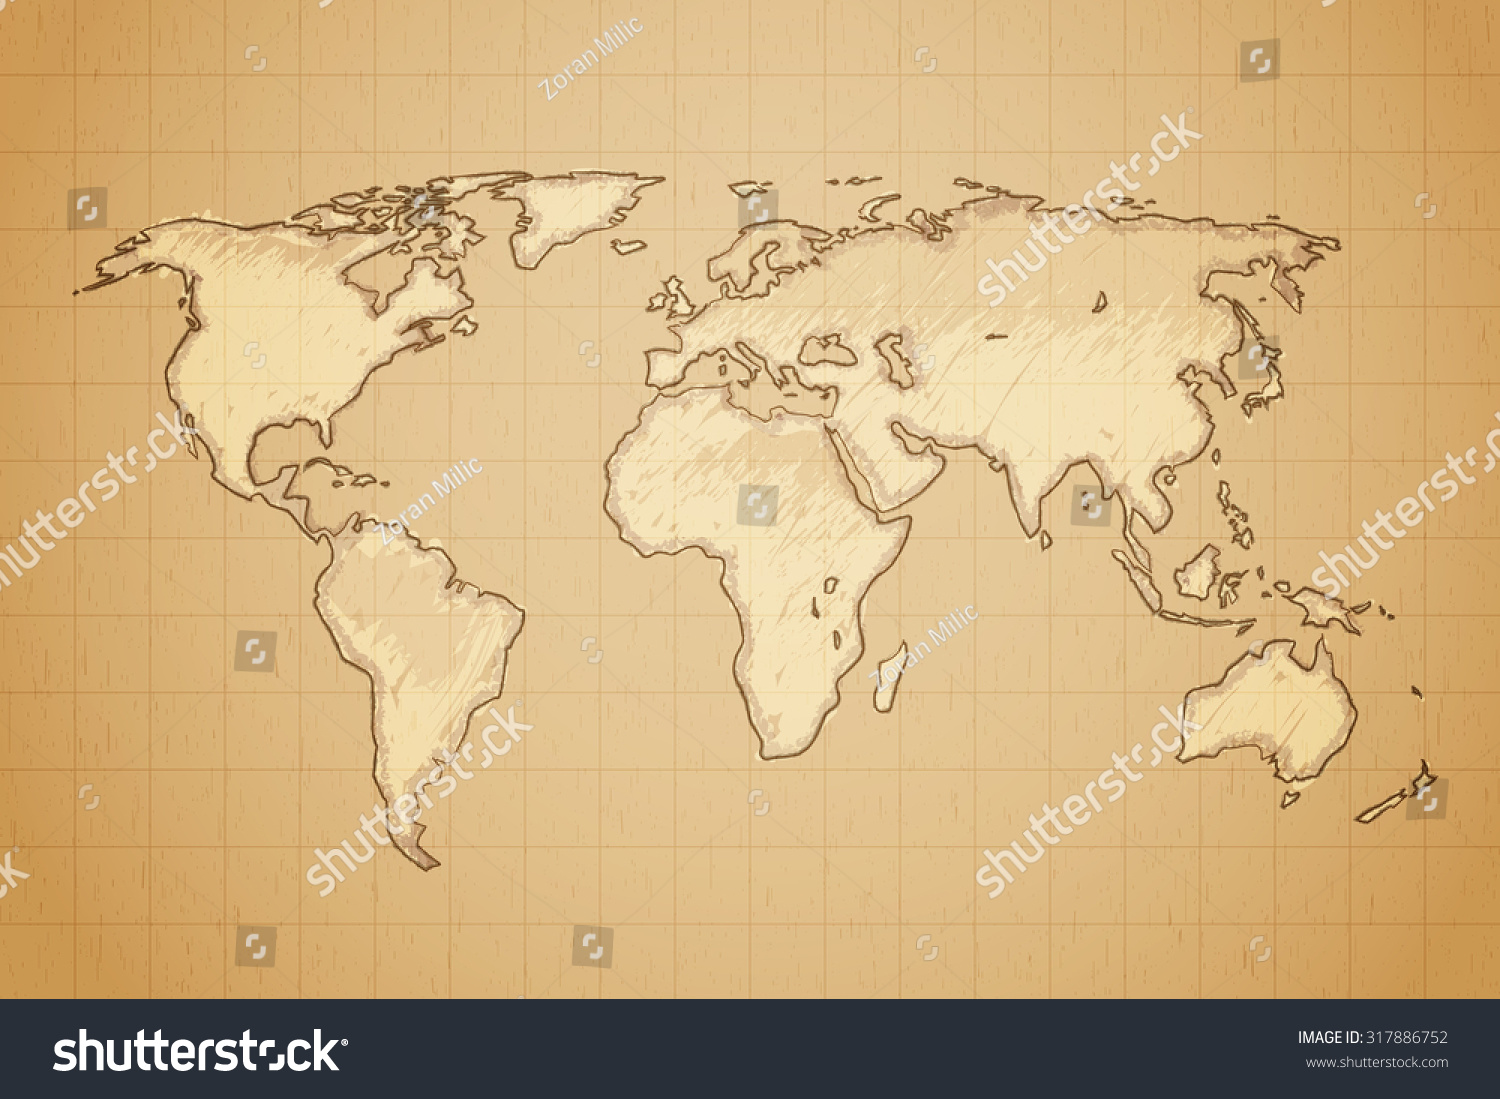 World map drawn on textured aged paper vector illustration.  #317886752